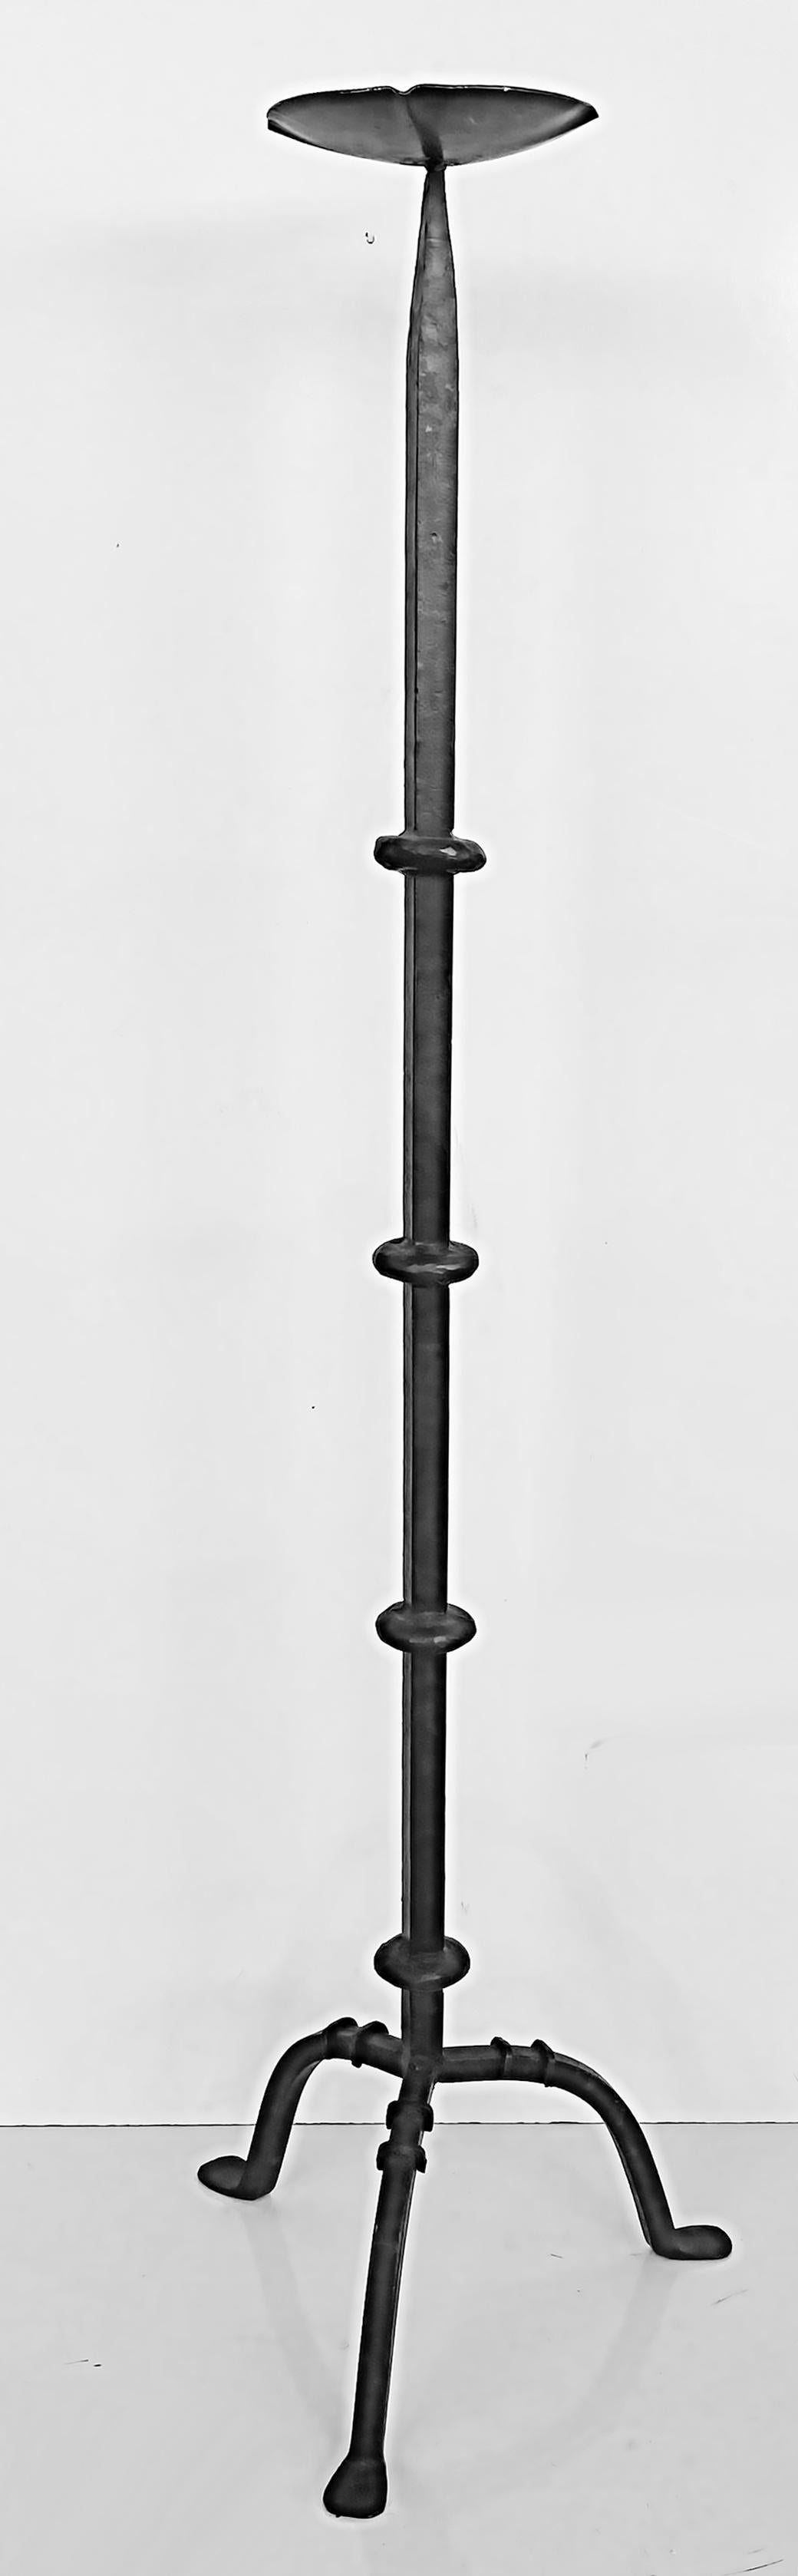 Antique hand-wrought Iron candle stands from a Millbrook, NY Estate

Offered for sale is a set of 2 antique 19th-century hand-forged wrought iron candle sticks. They were acquired from a Millbrook, New York estate. They are a matching set with one